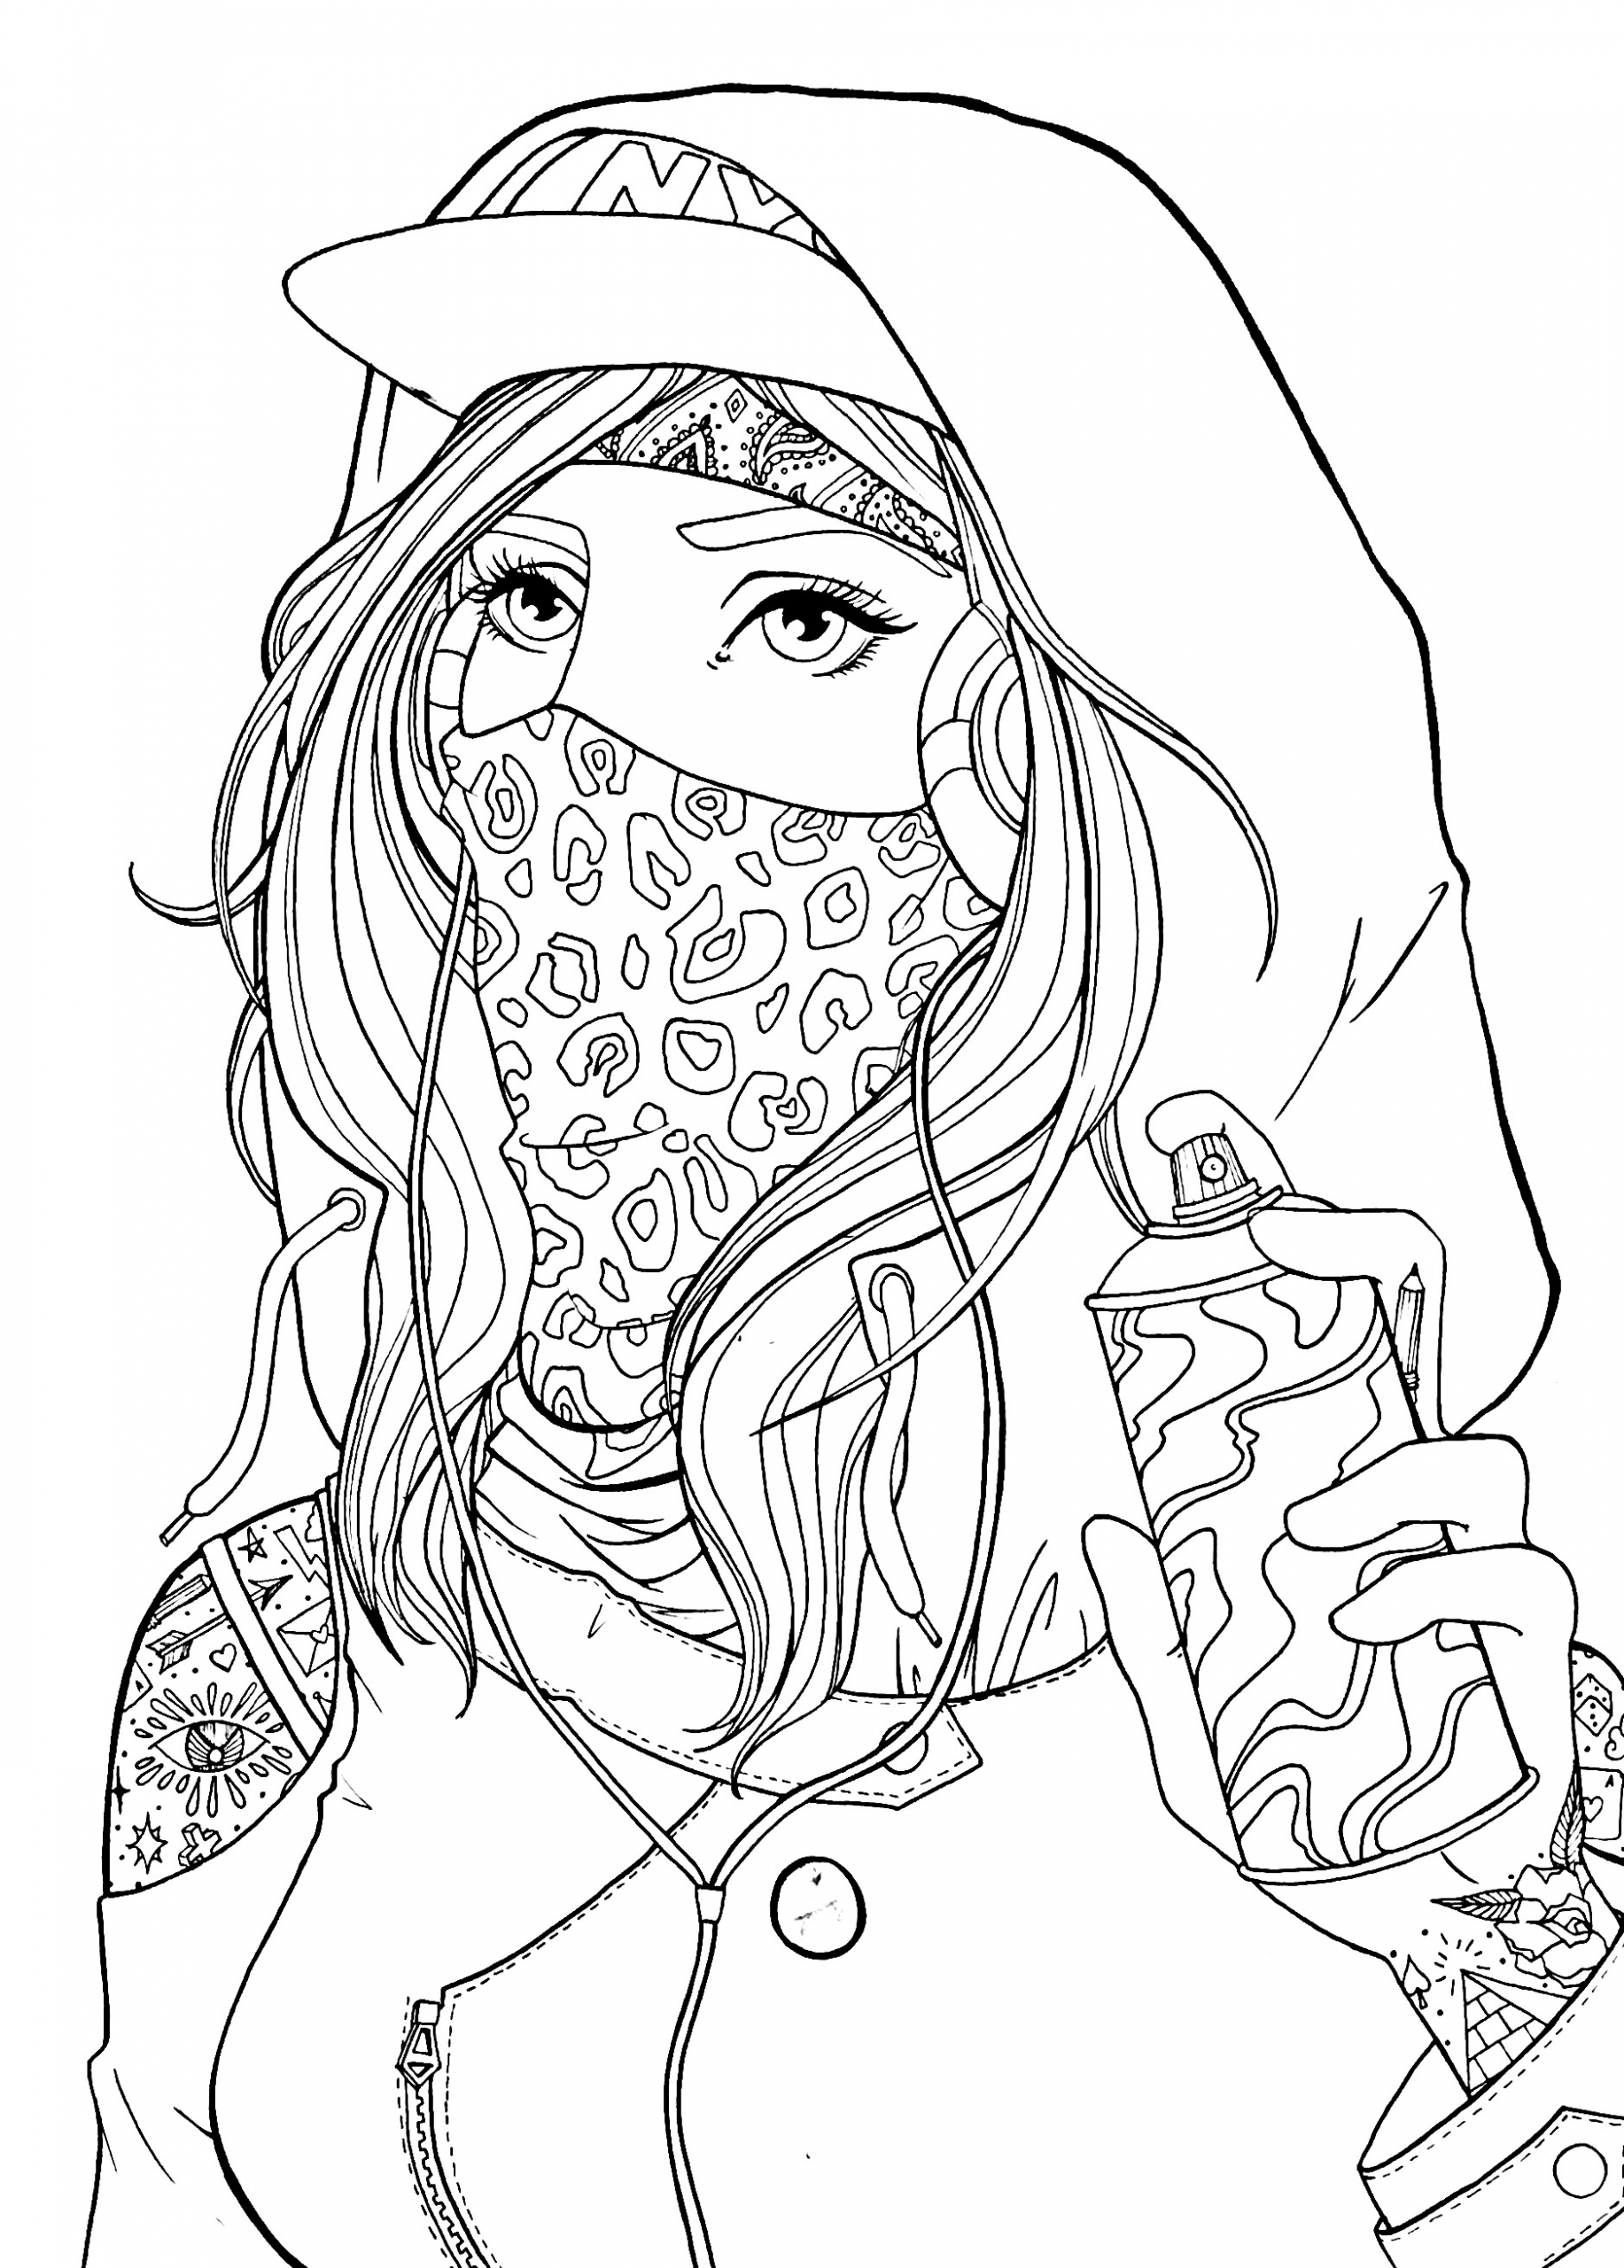 Girl Coloring Pages For Adults
 Graffiti girl drawing lineart